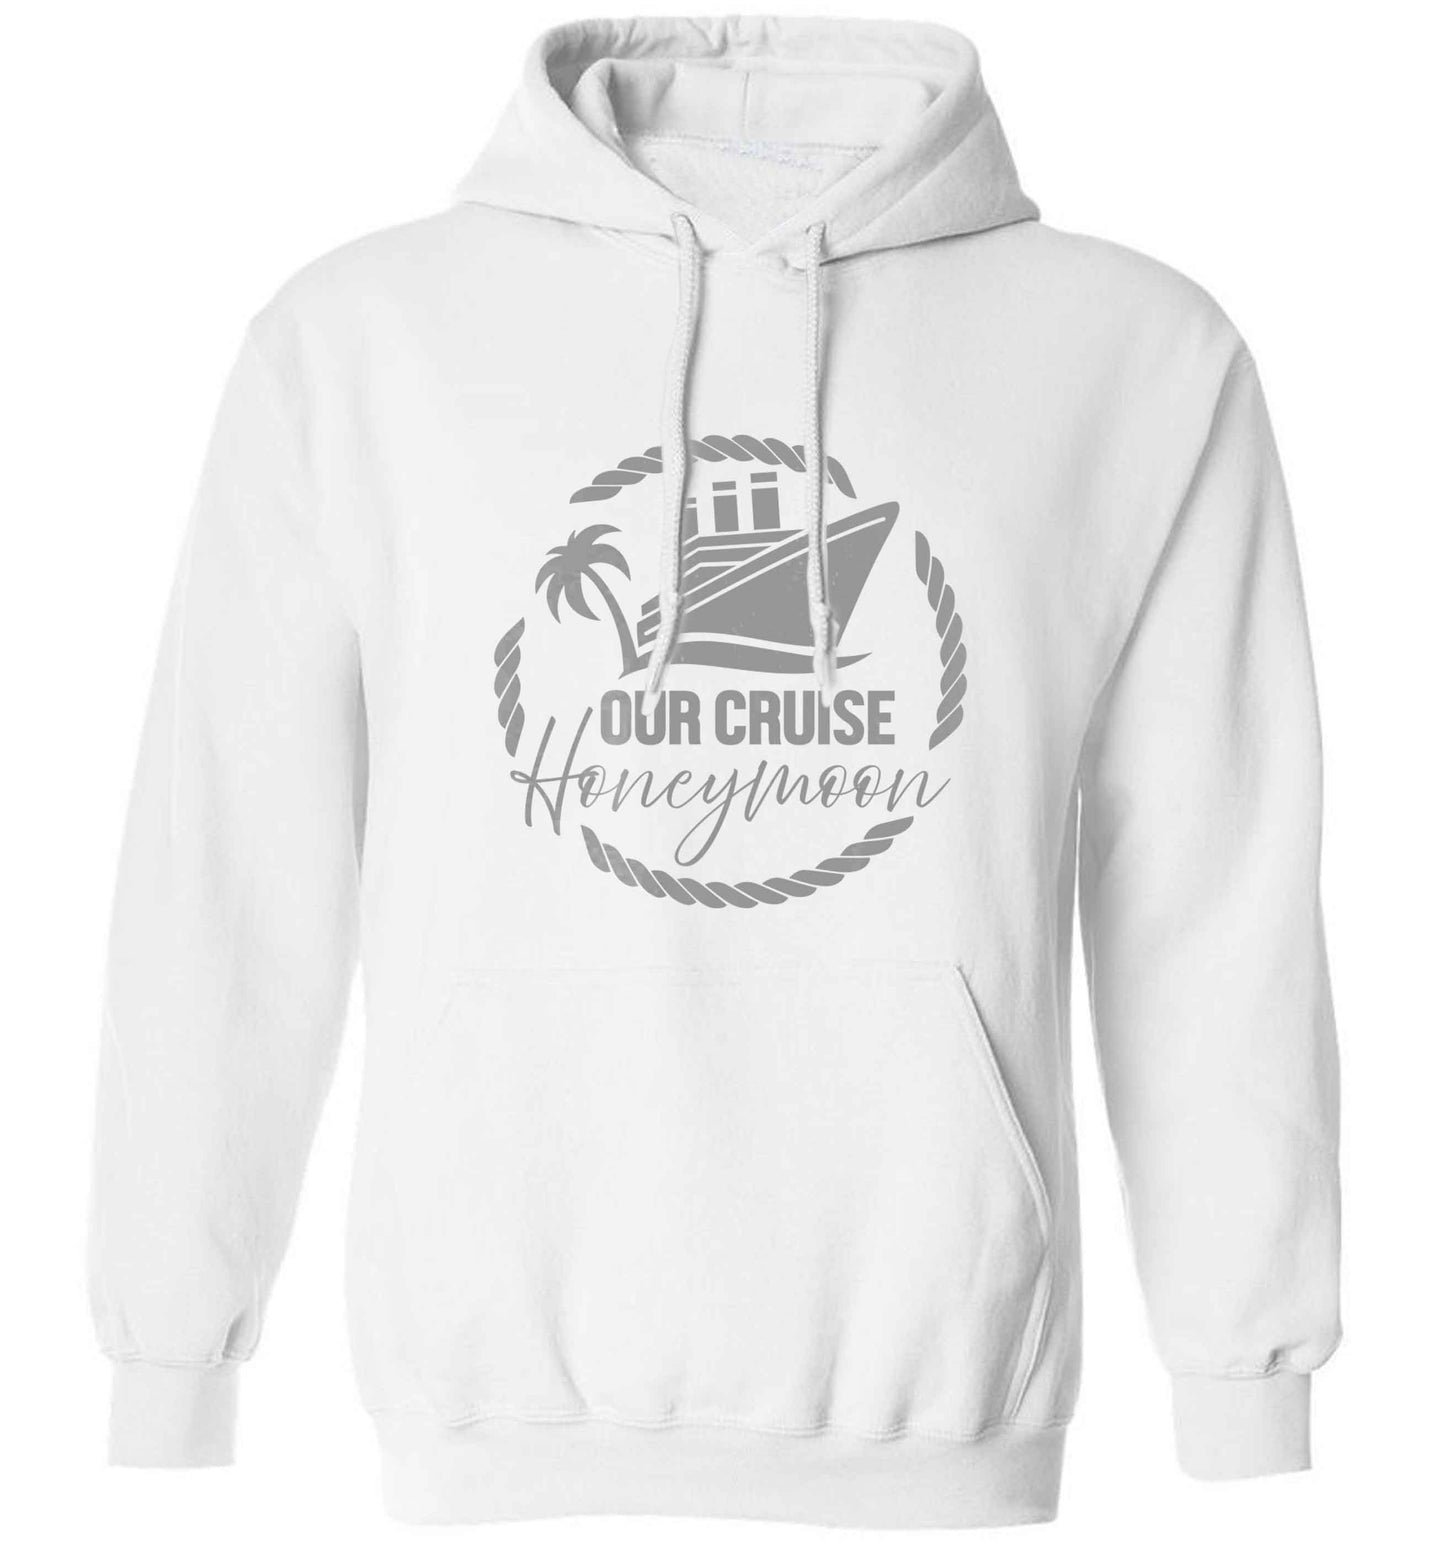 Our cruise honeymoon adults unisex white hoodie 2XL